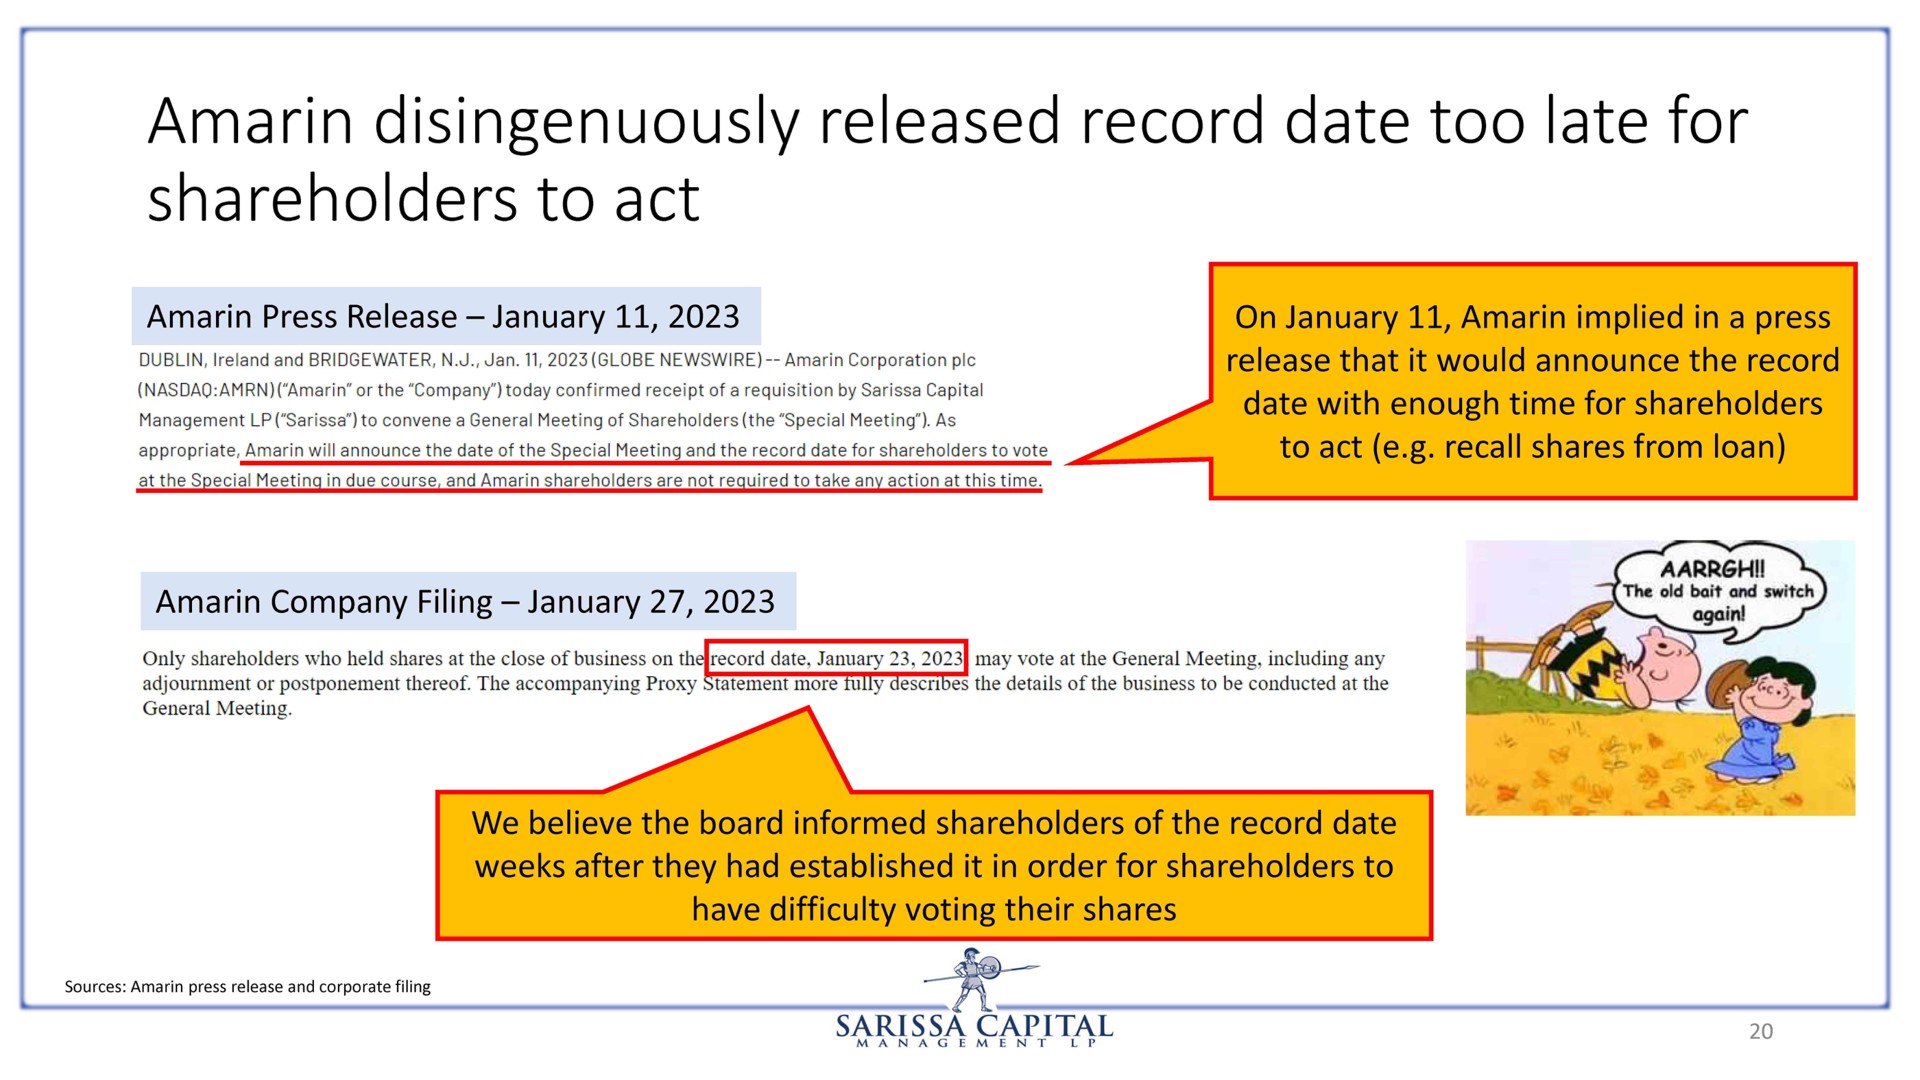 amarin disingenuously released record date too late for shareholders to act | Sarissa Capital